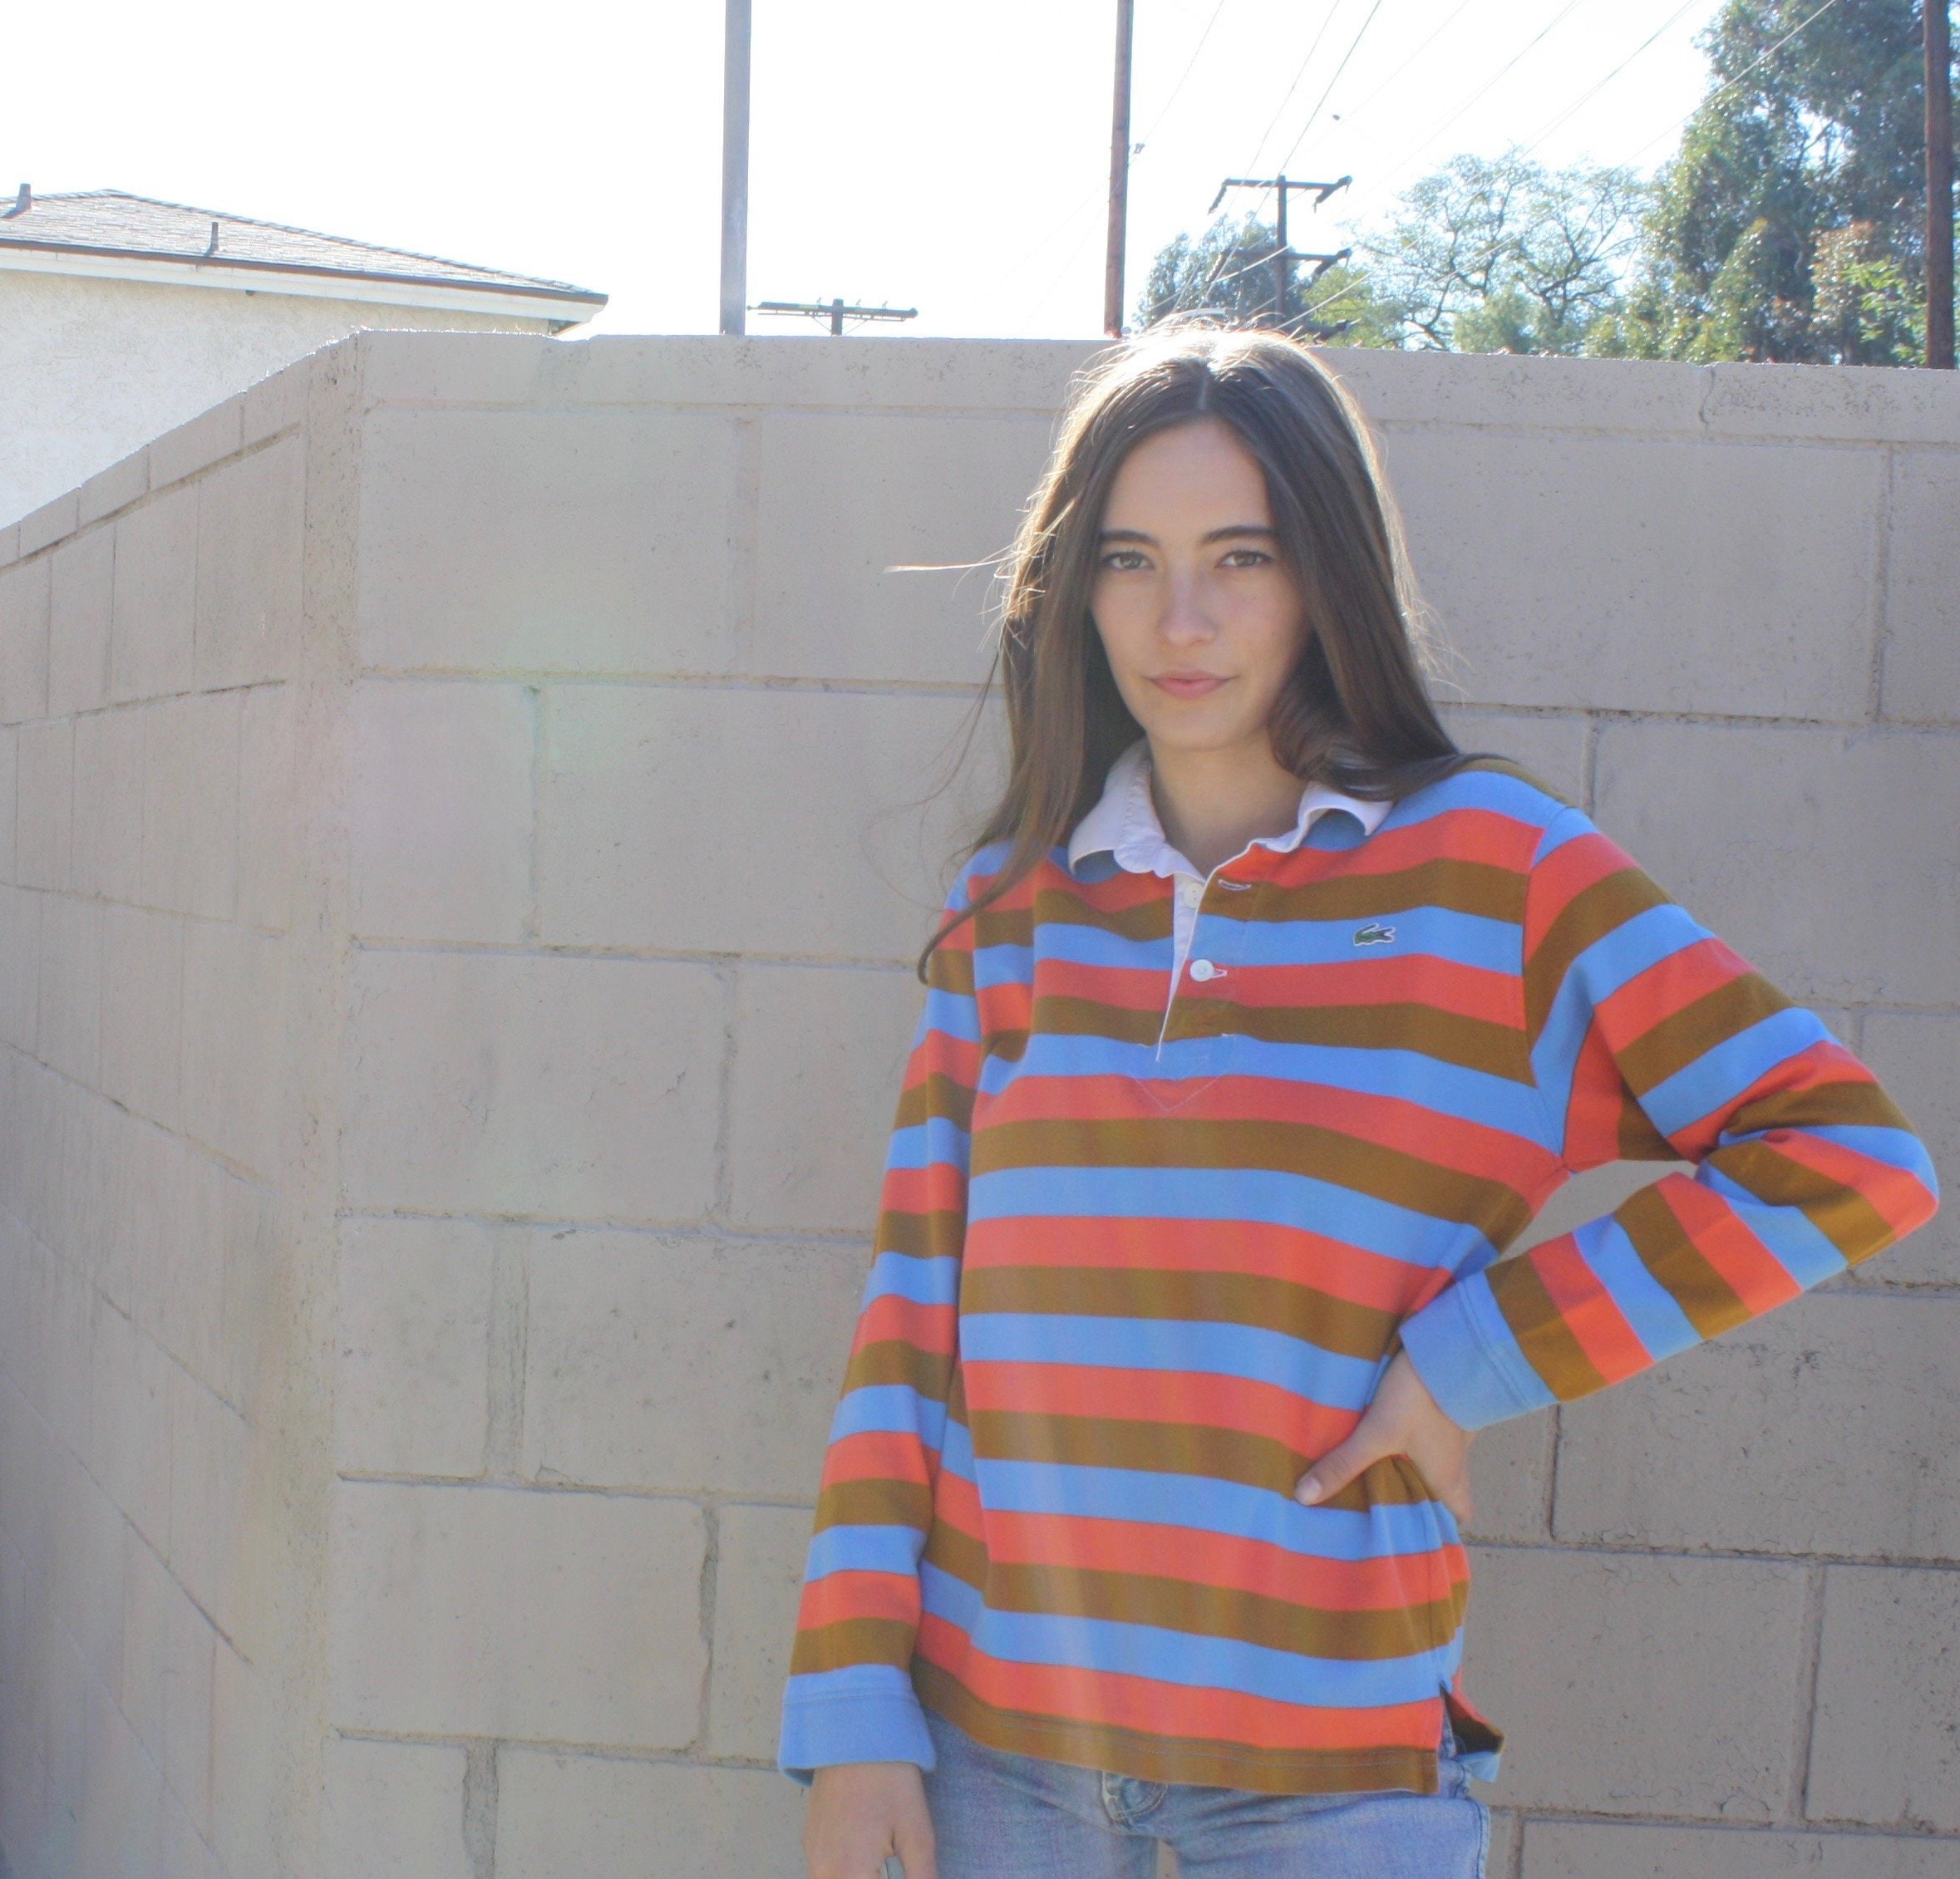 Vampire Weekend Lacoste // boho hippie rugby hipster dress blouse preppy top shirt 80s striped 1980s // S/M